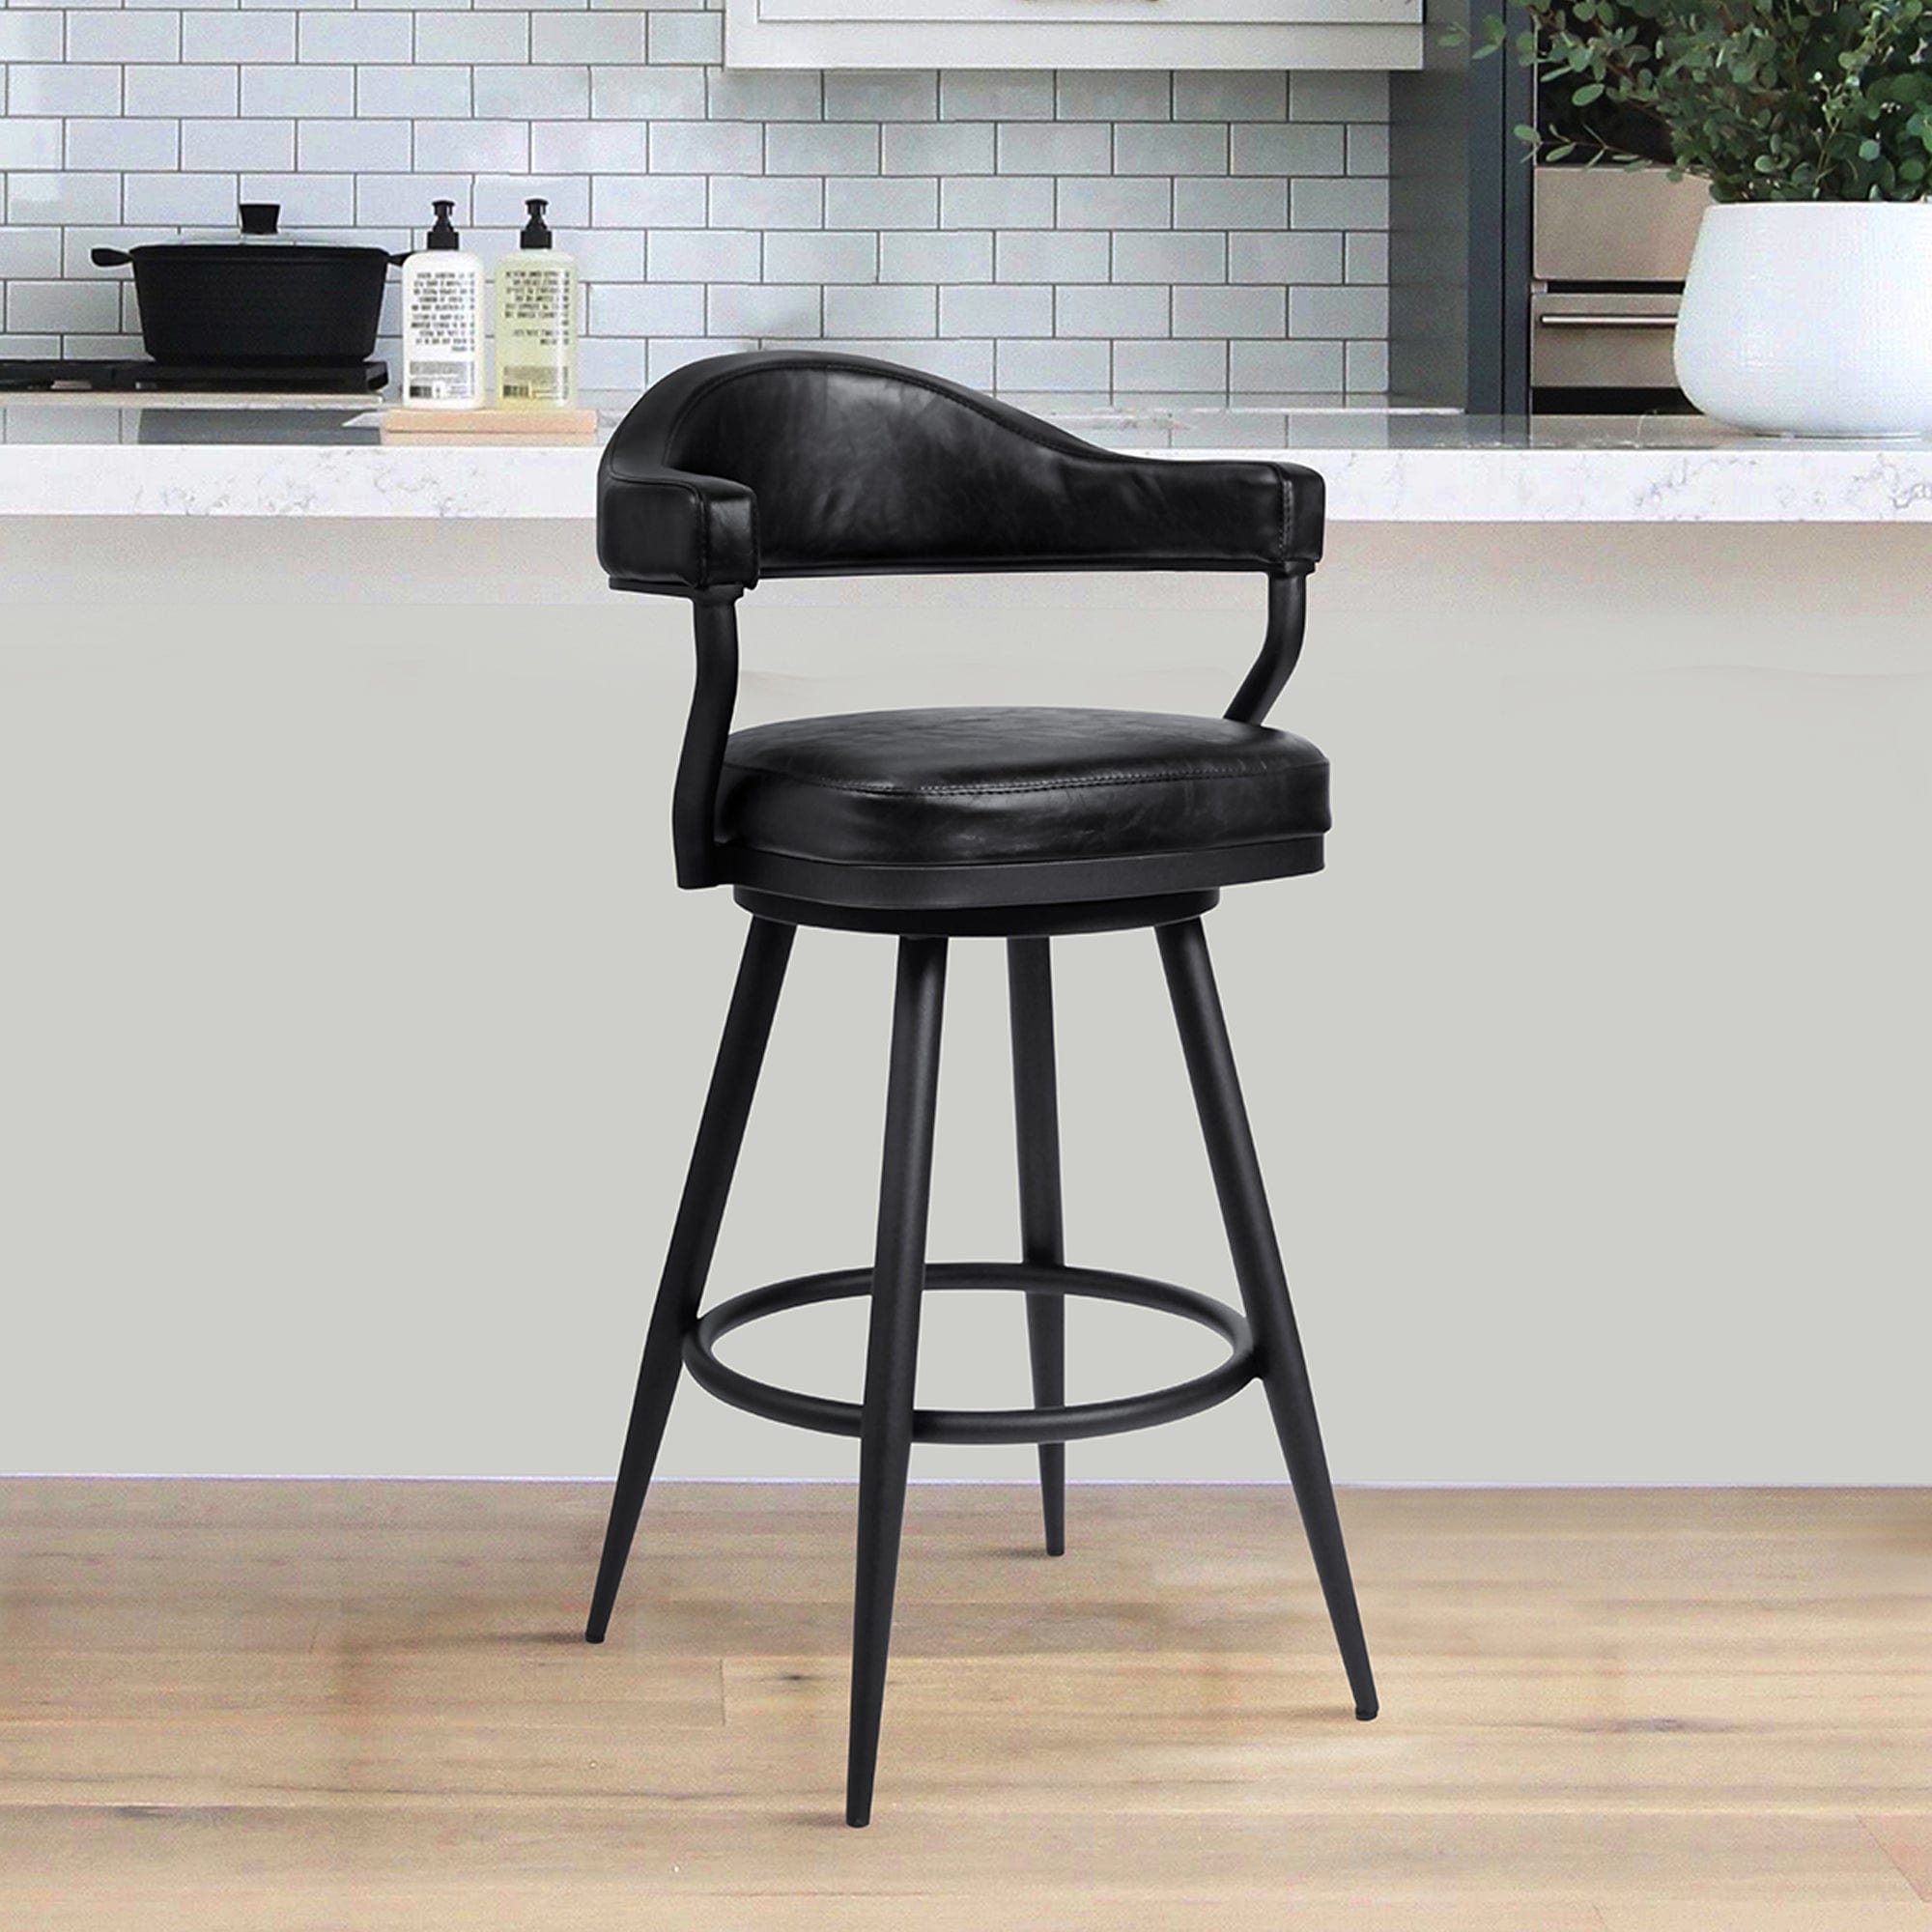 Armen Living Barstool Armen Living | Amador 30" Bar Height Barstool in a Black Powder Coated Finish and Vintage Black Faux Leather | 721535746972